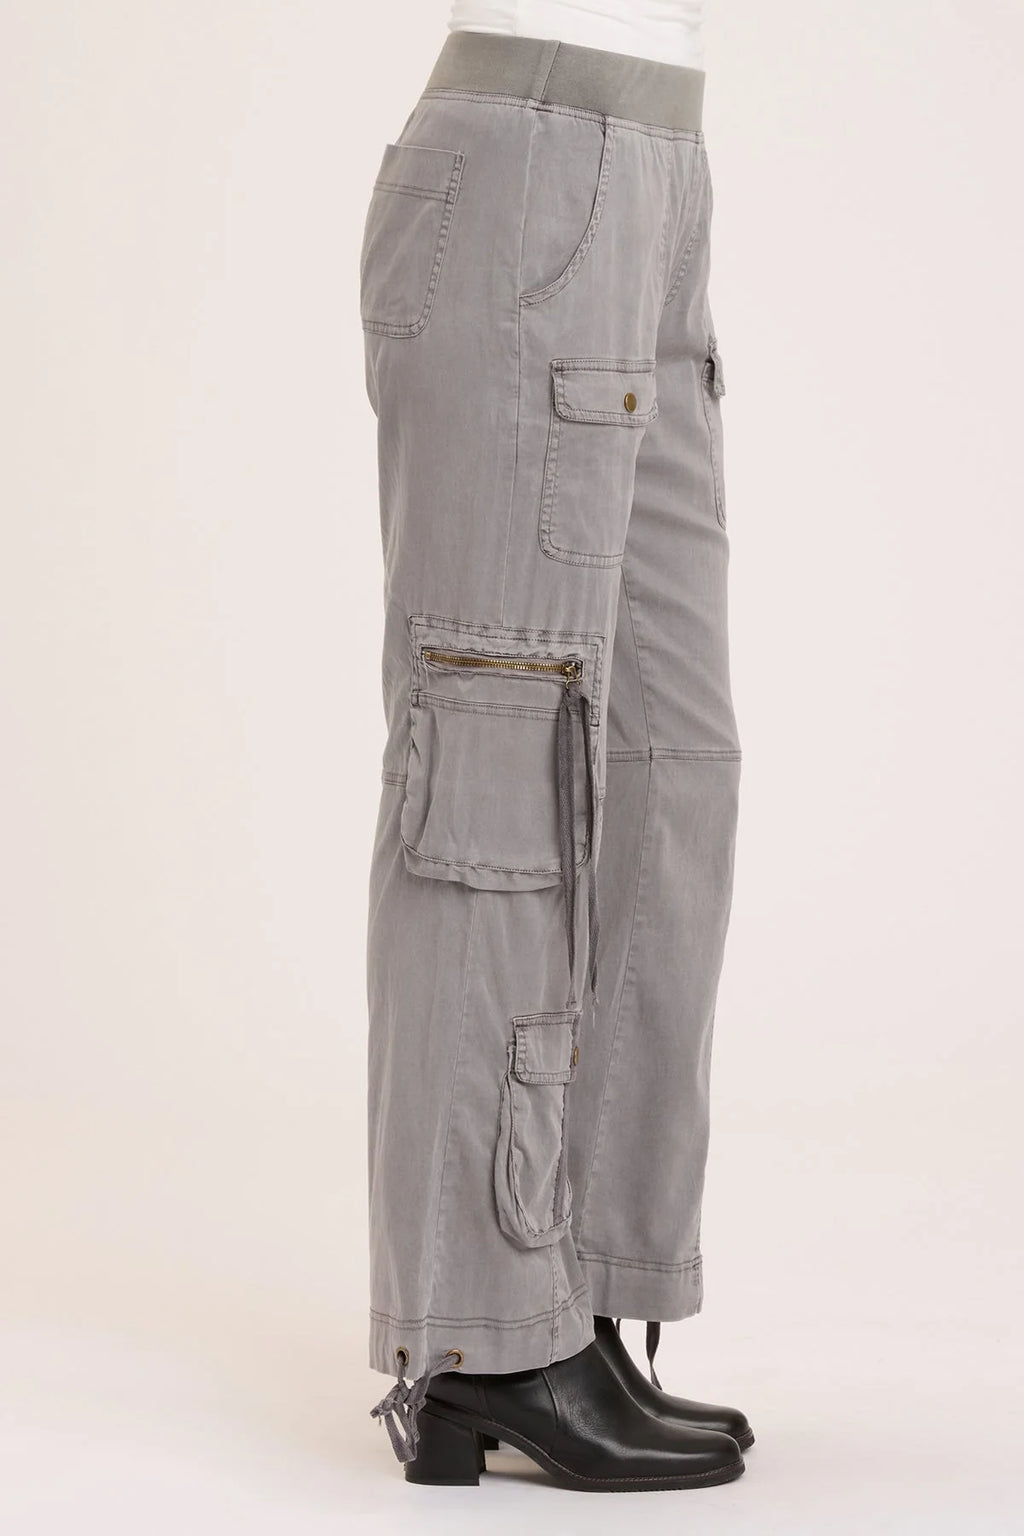 XCVI/Wearables Chaucer Cargo Pant